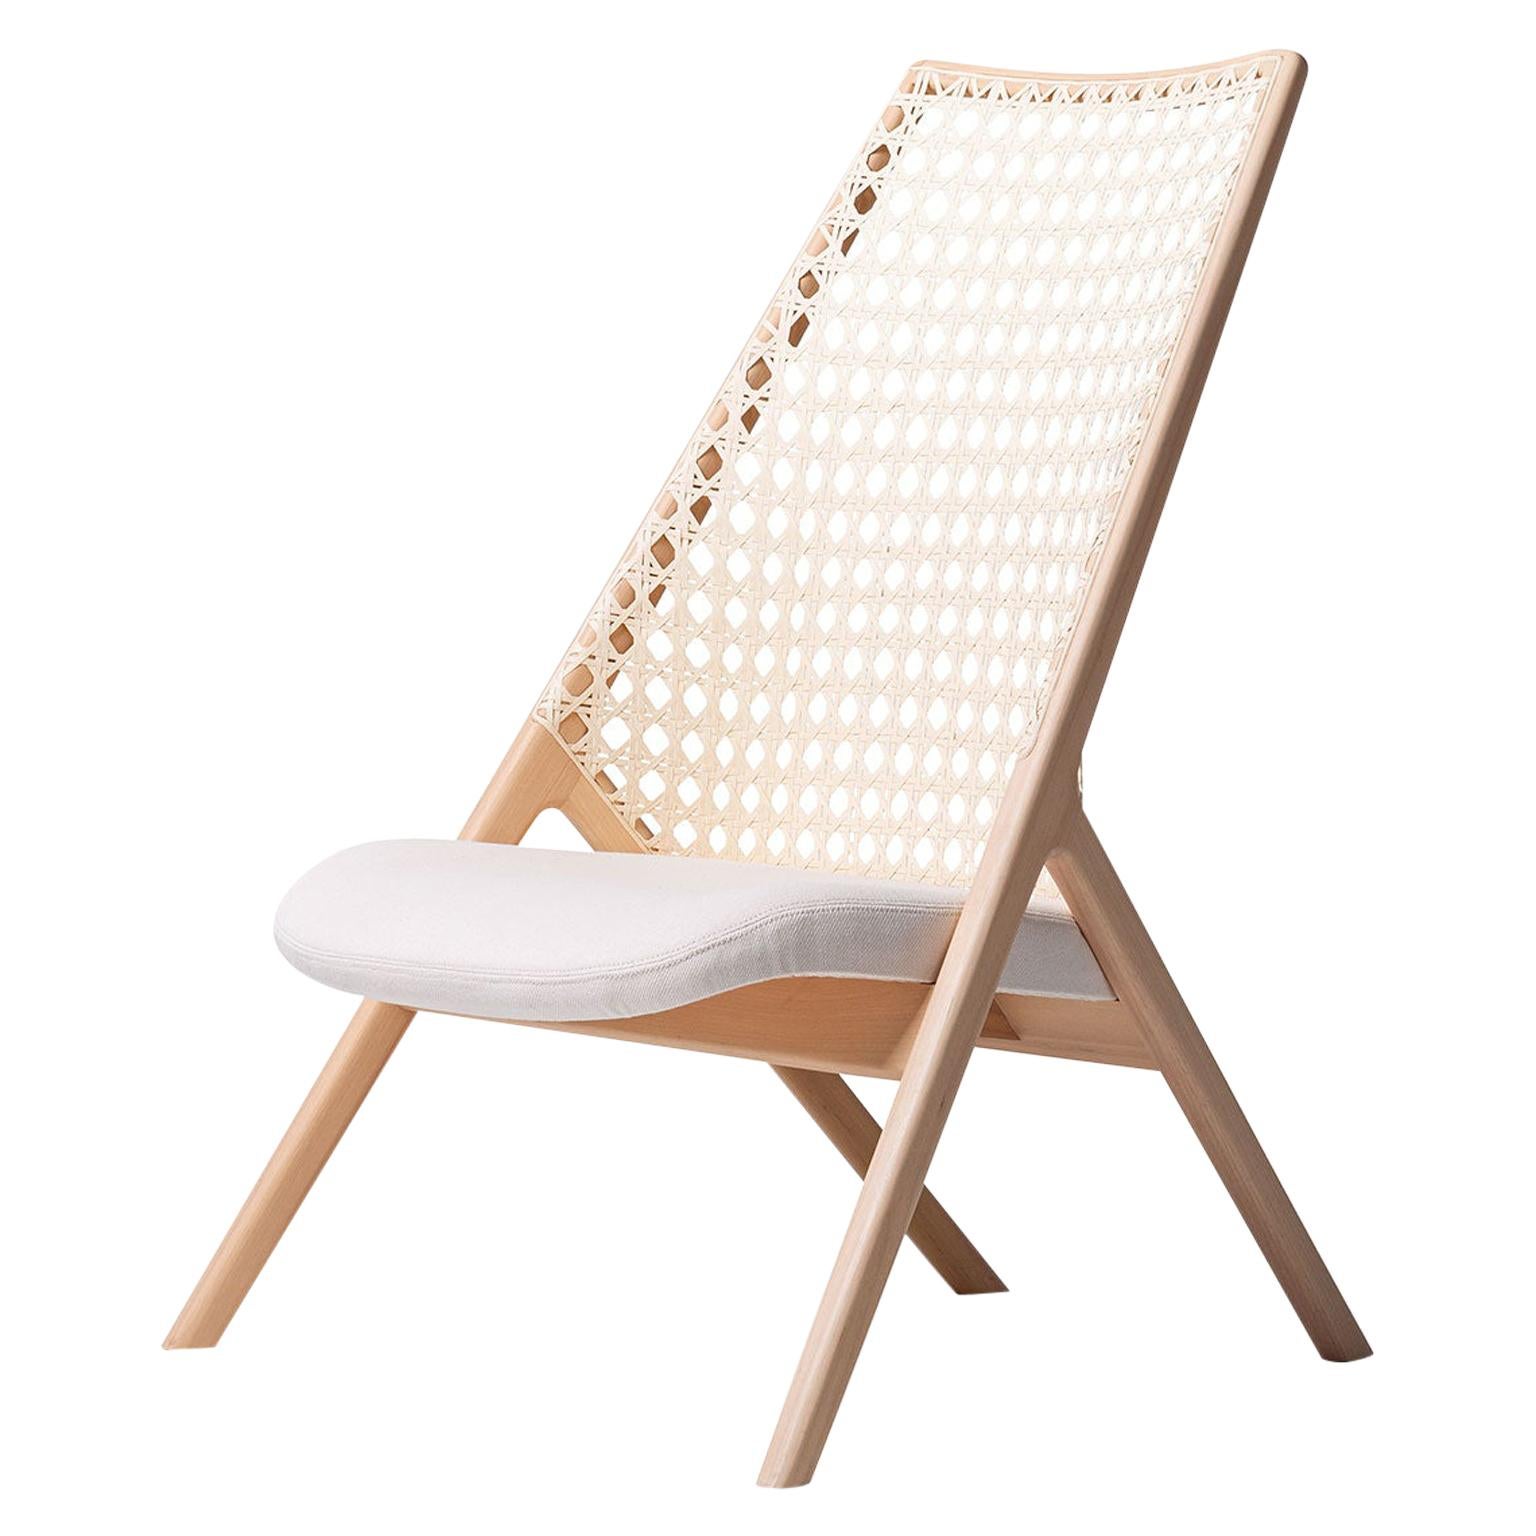 Tela Lounge Chair in Recycled Cotton, by Wentz, Brazilian Contemporary Design